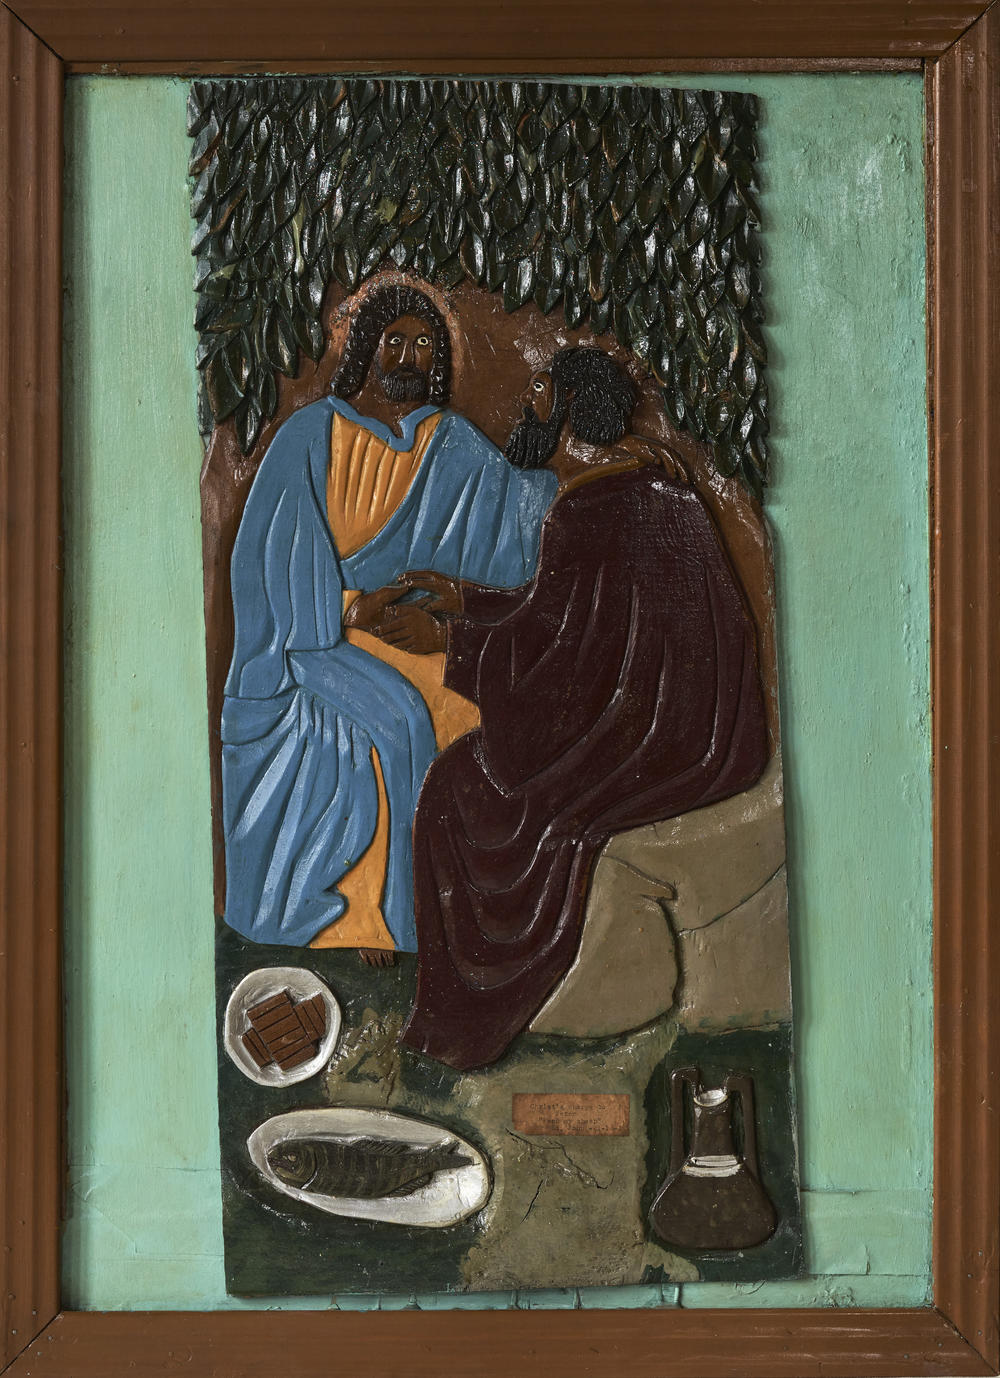 <em>Christ's Charge to Peter: Feed My Sheep,</em> by Elijah Pierce, 1932, paint on carved wood